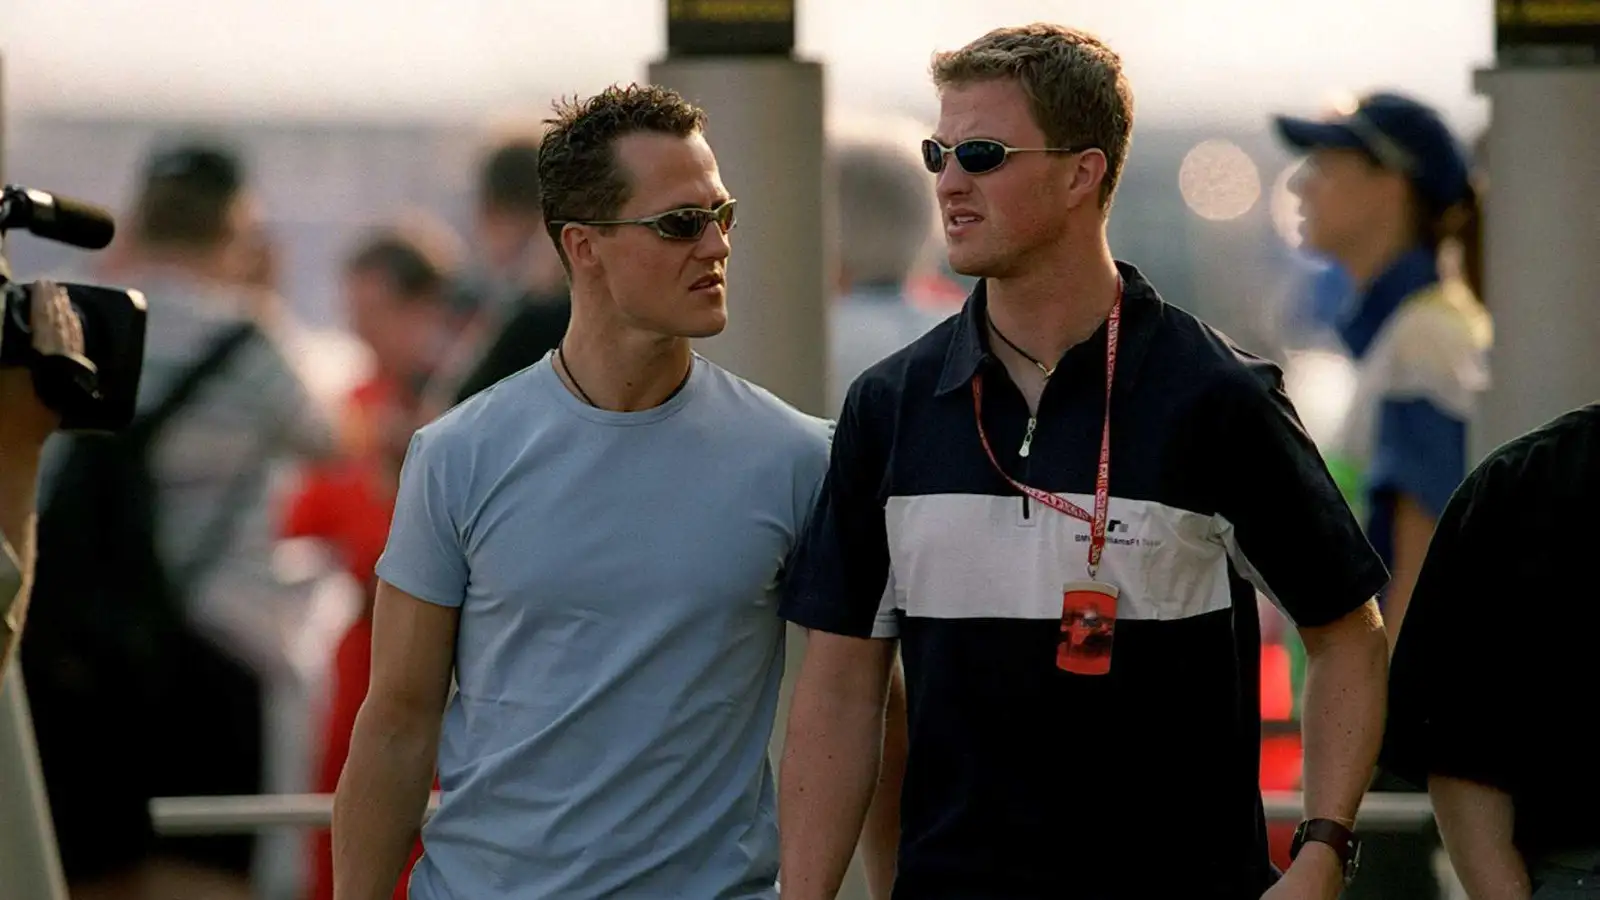 Michael and Ralf Schumacher in the F1 paddock at the 2001 German Grand Prix.